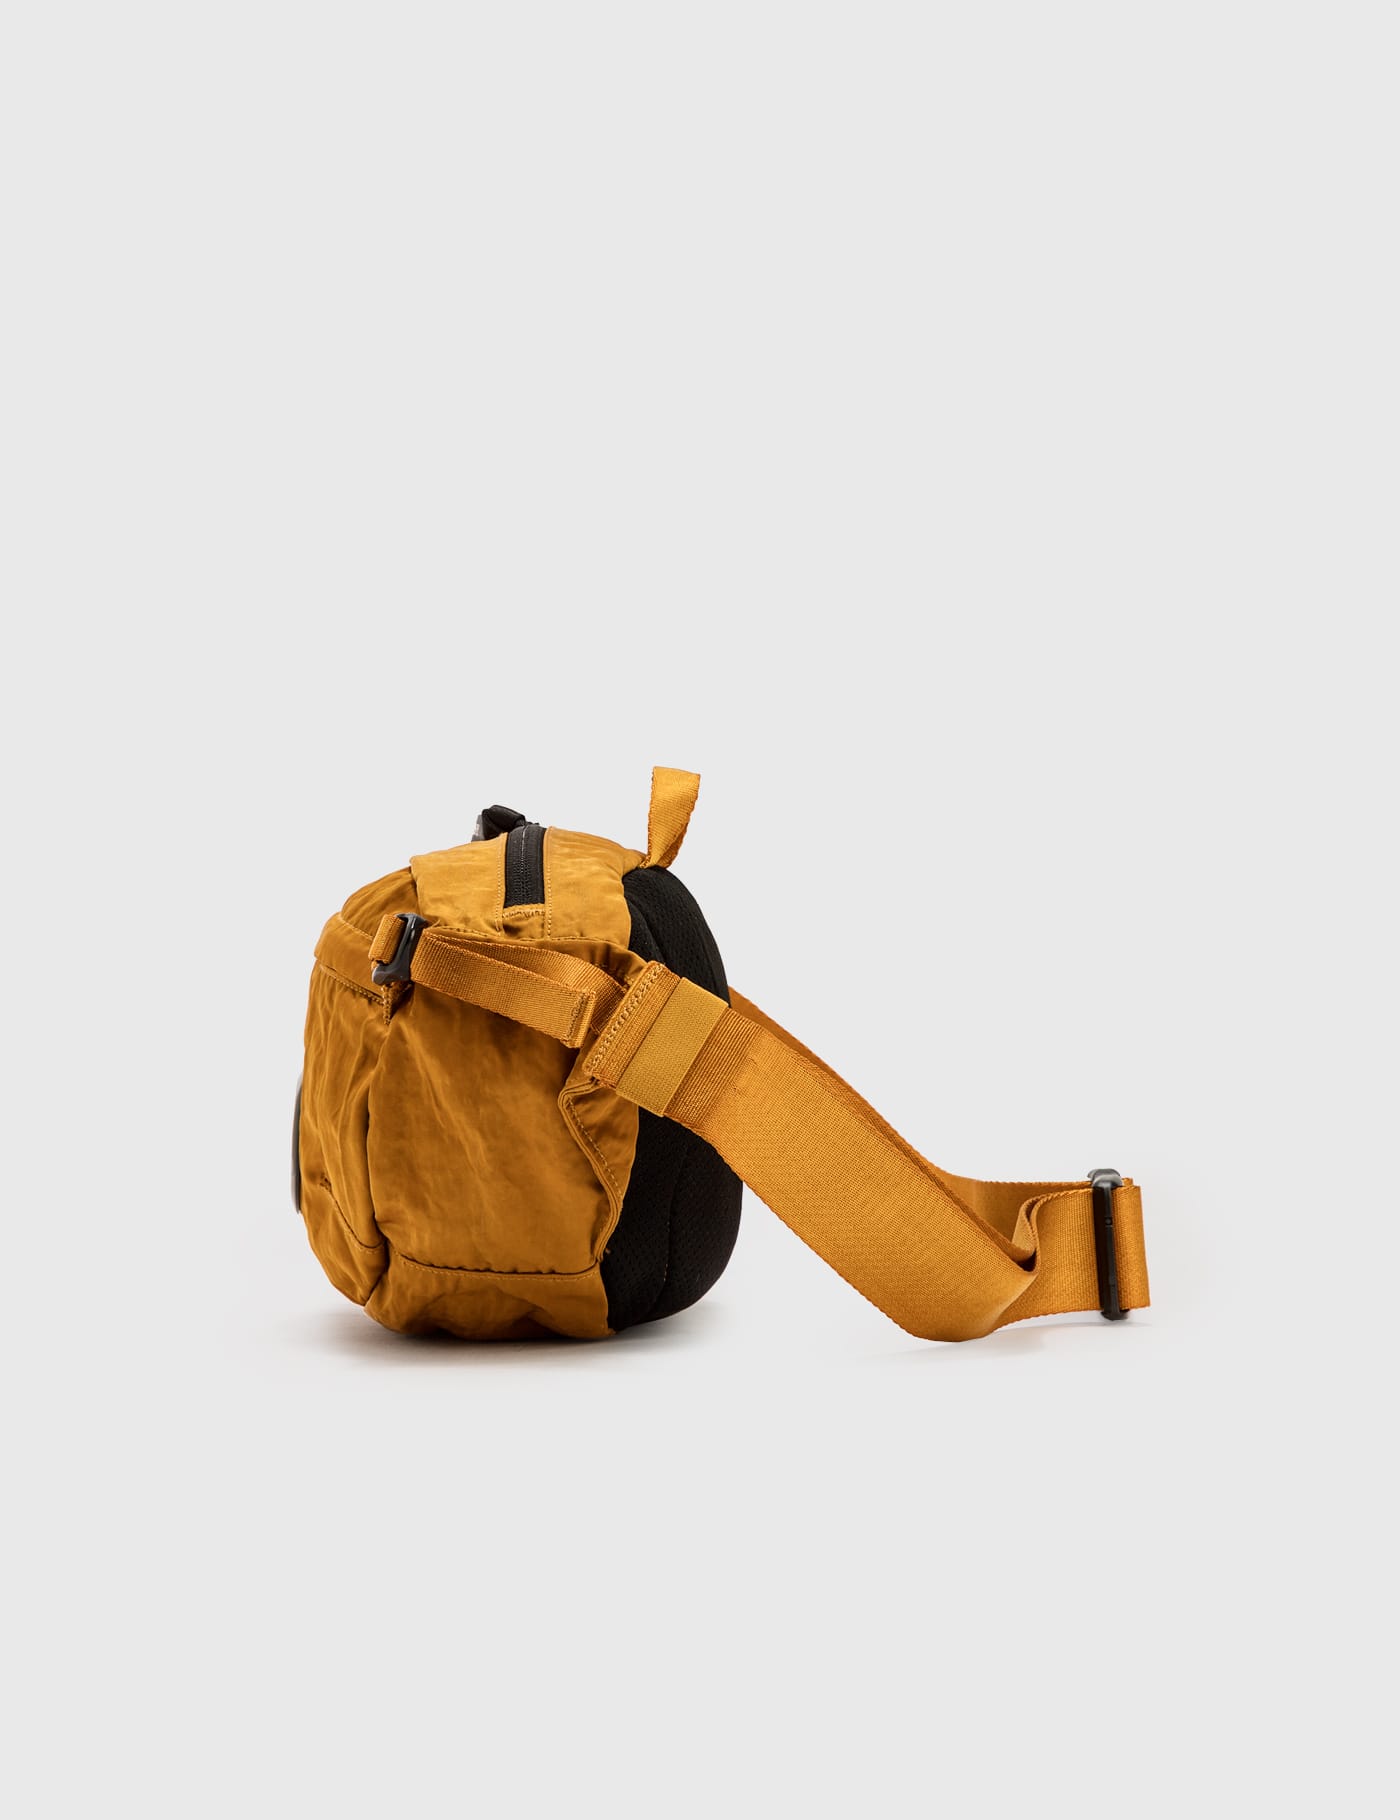 C.P. Company - Nylon Lens Crossbody Bag | HBX - Globally Curated Fashion  and Lifestyle by Hypebeast